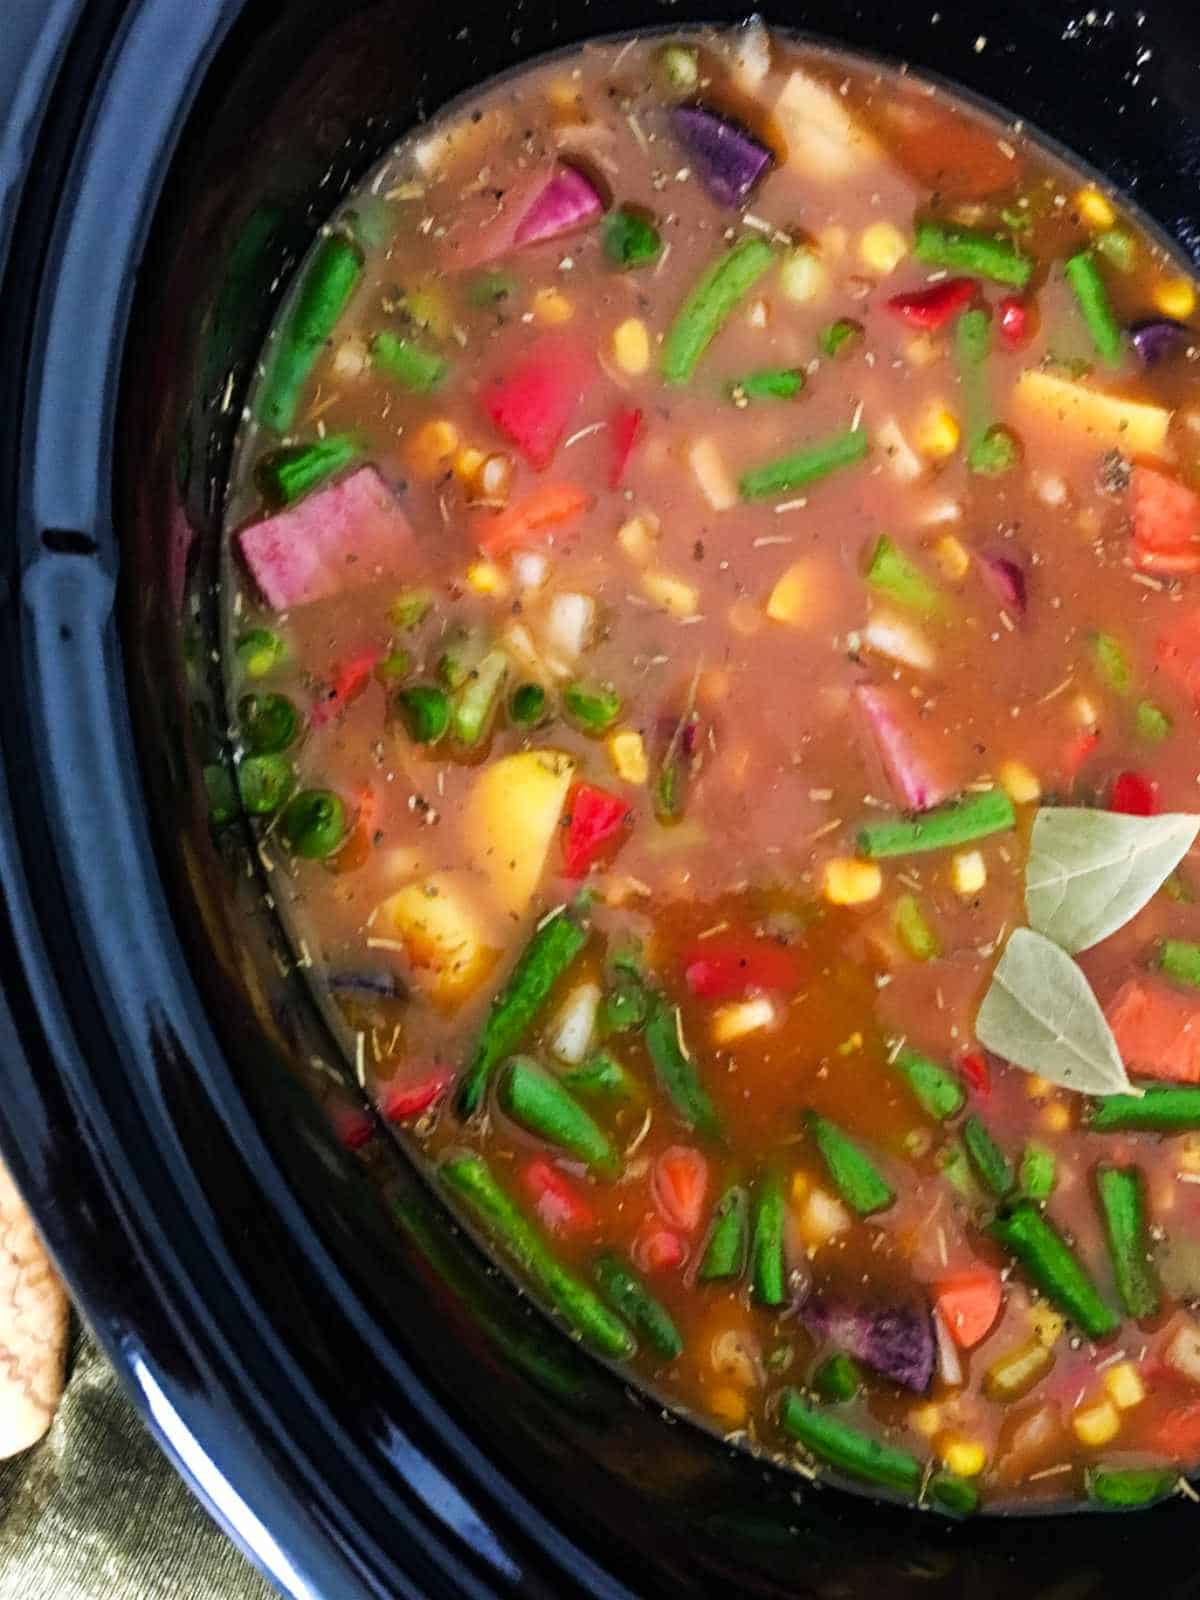 slow cooker with vegetable soup ready to cook.